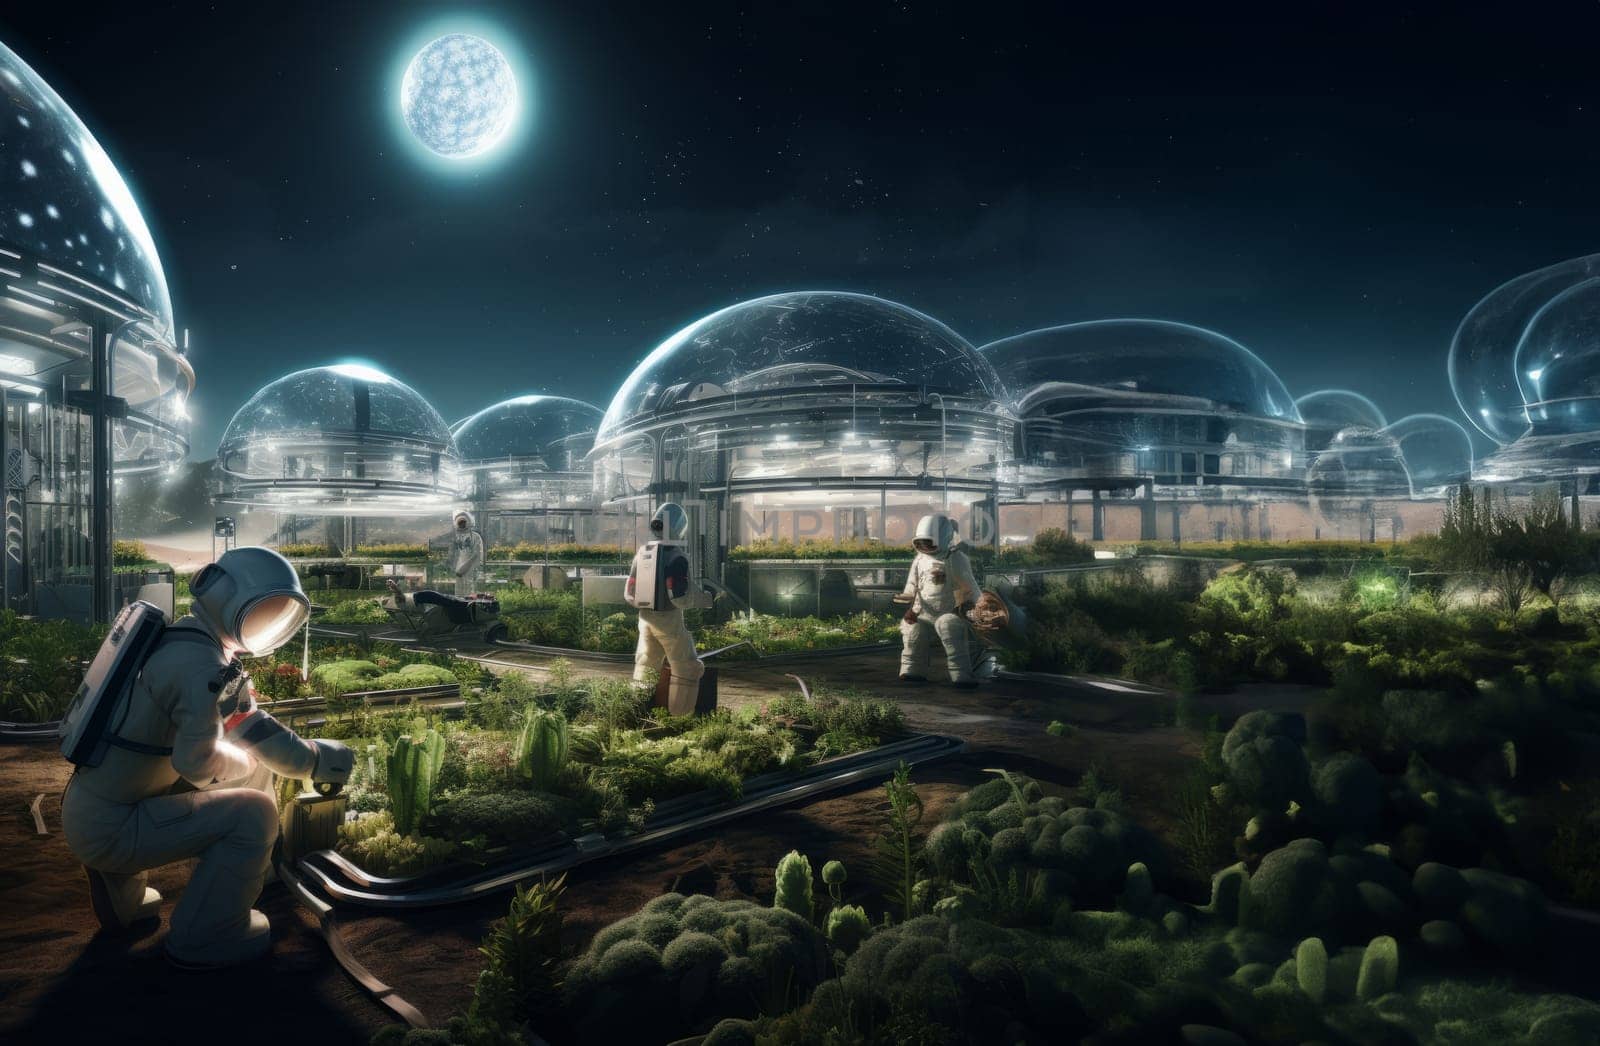 A futuristic depiction of agriculture shows cultivation and farming in glass enclosures on the surface of Mars in space, highlighting innovation and sustainability efforts in space colonization and exploration.Generated image by dotshock